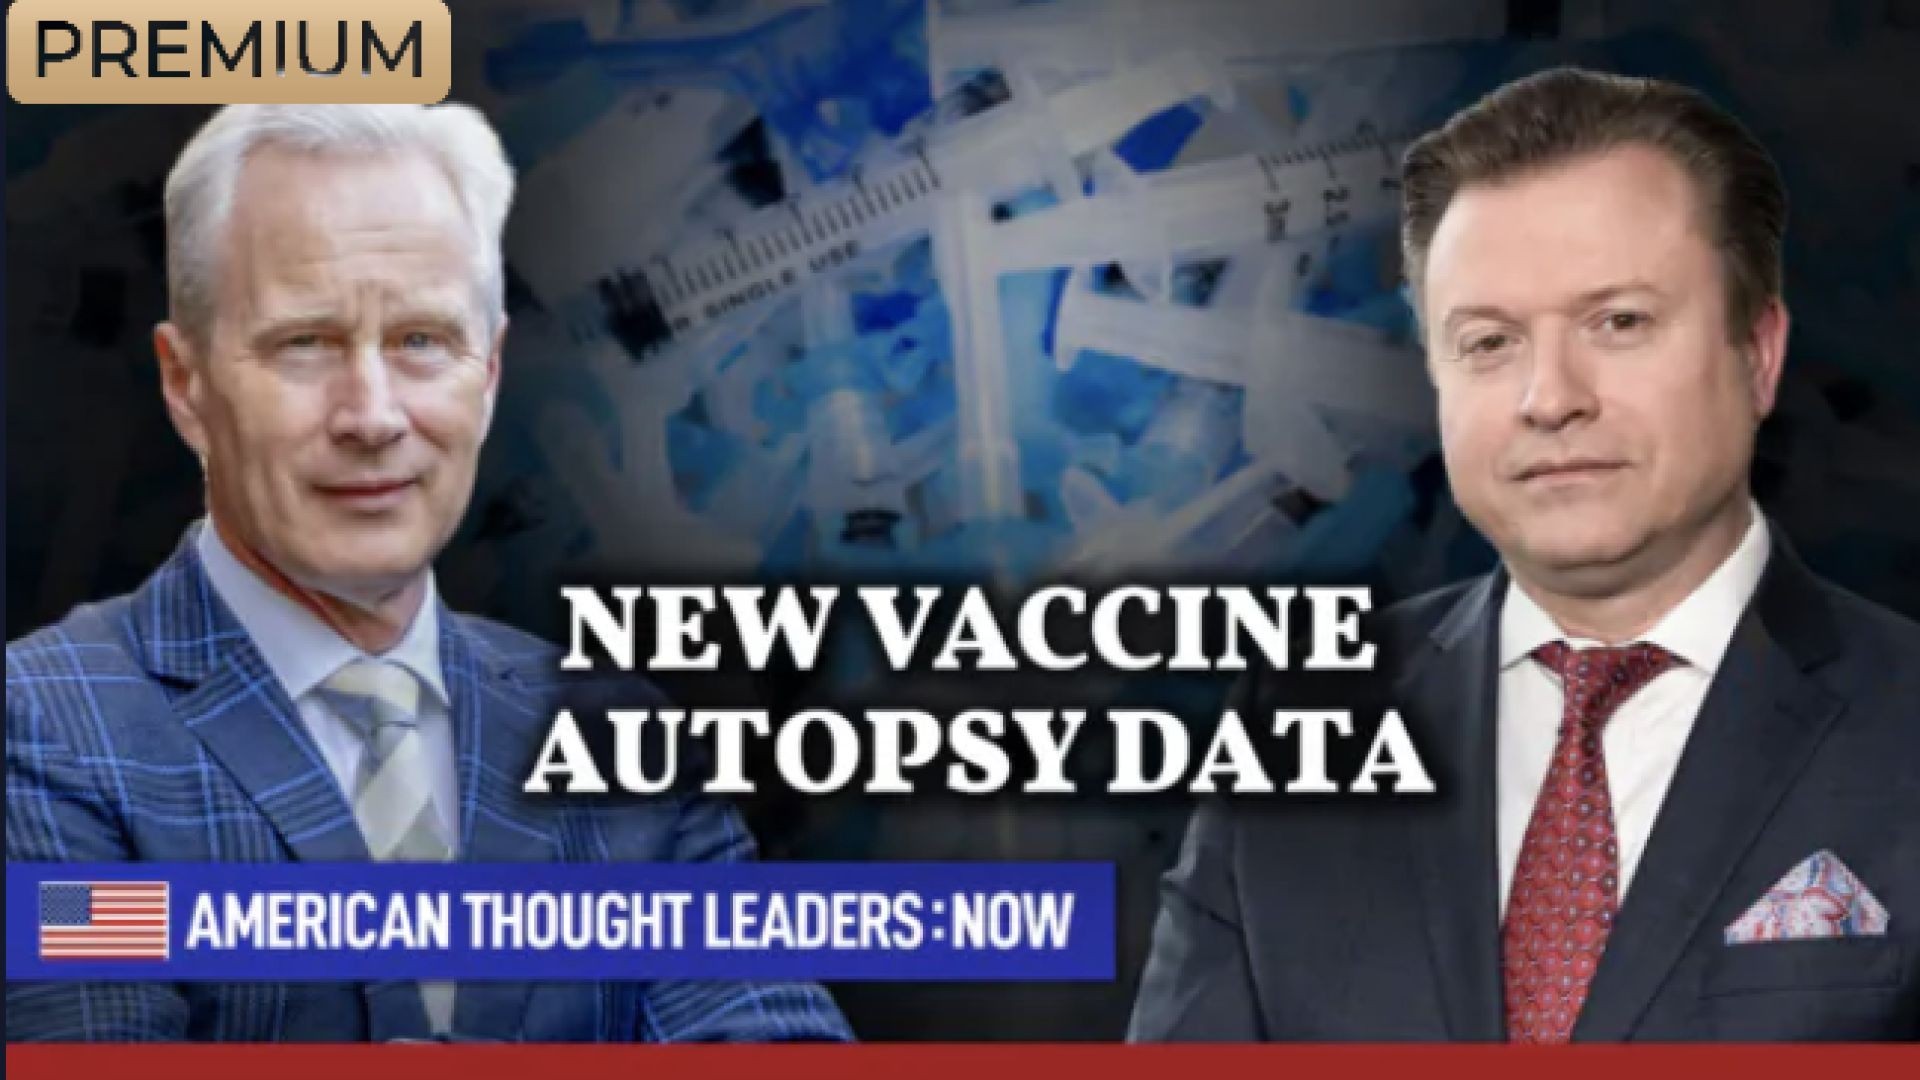 What Post-Vaccination Autopsies Show: Dr. McCullough New Analysis, Removed by Lancet |